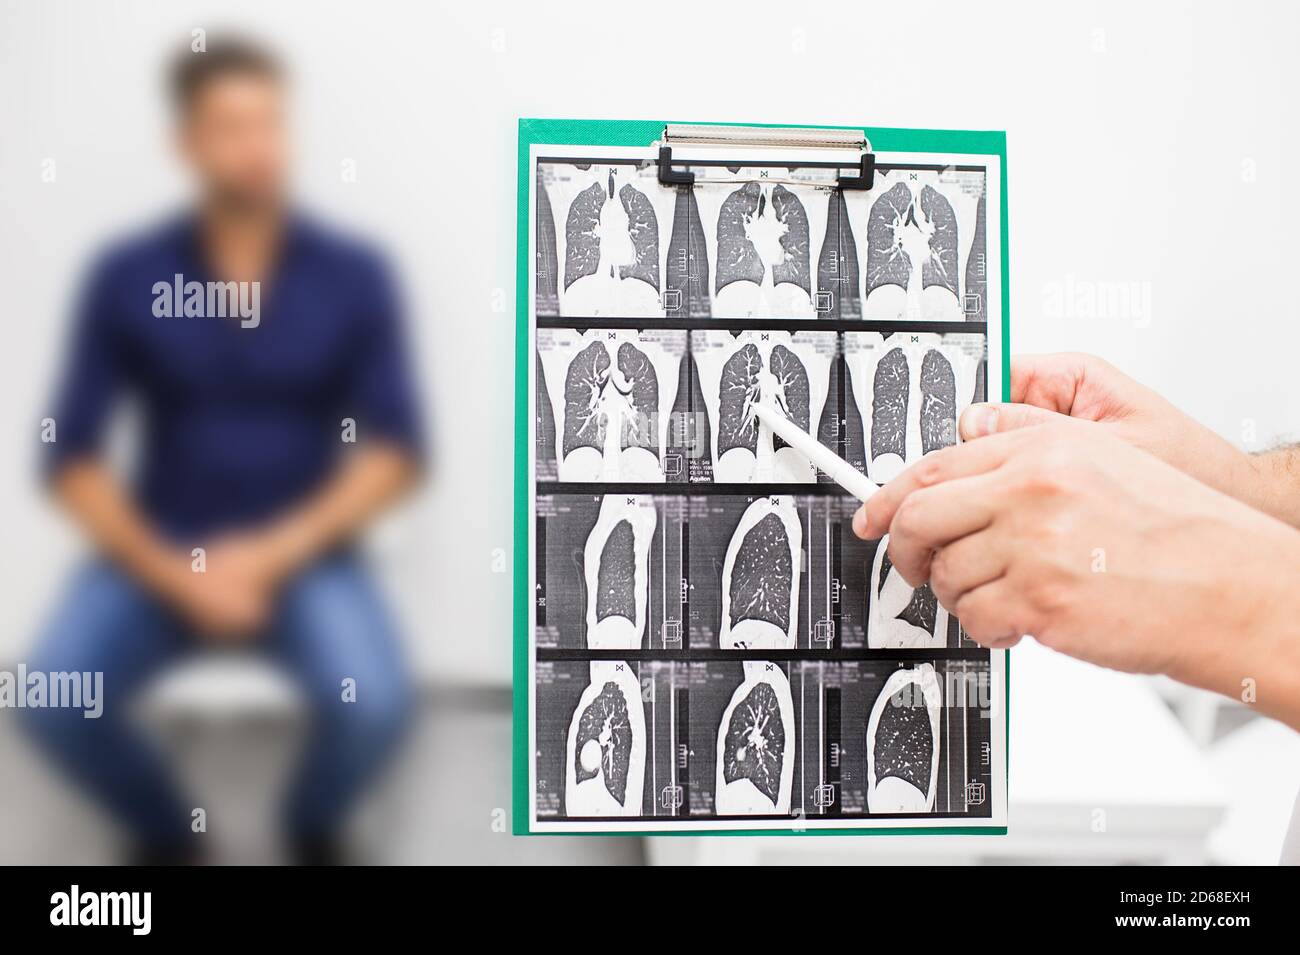 Pulmonologist showing CT scan of lungs patient with pulmonary fibrosis, after recovery, lung disease Stock Photo